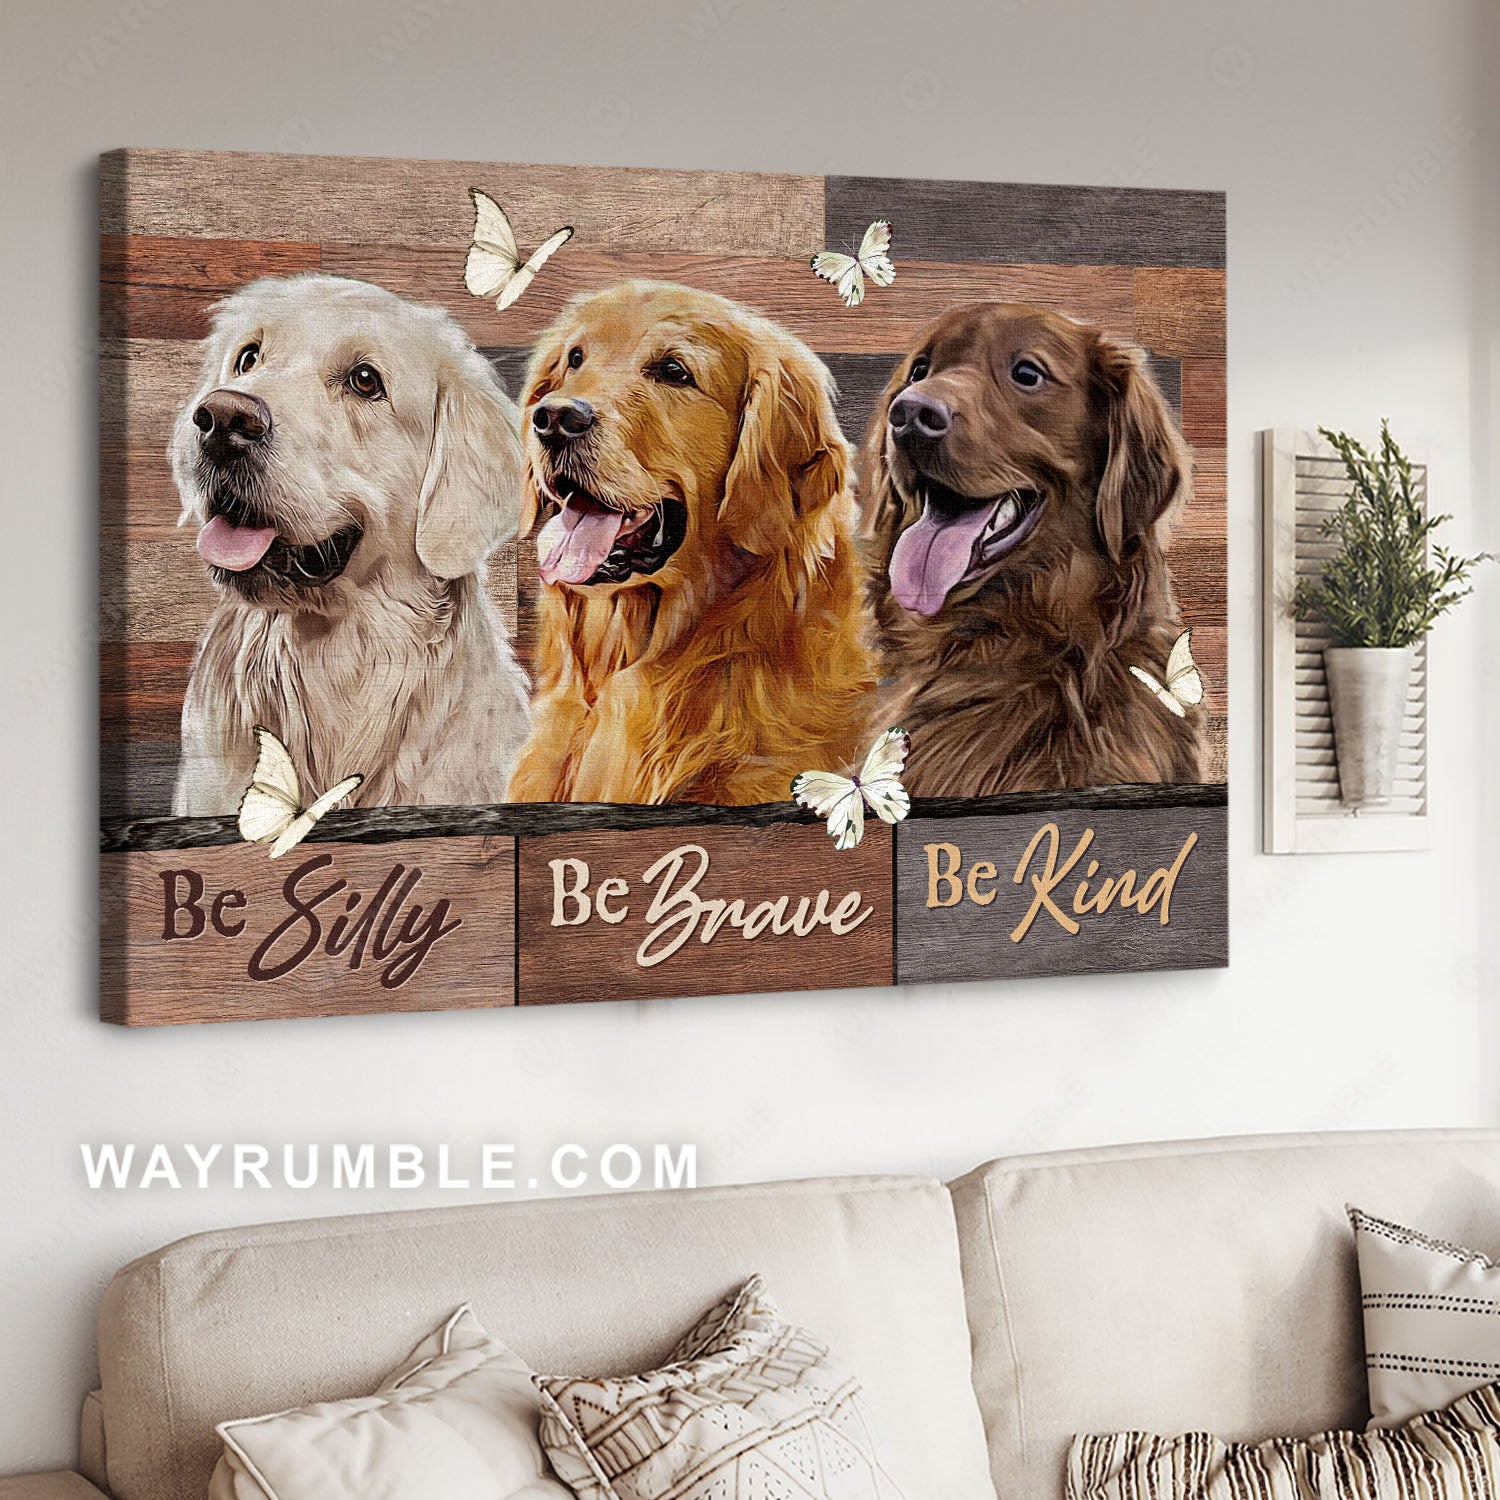 Golden Retriever, Dog drawing, Cute pet, White butterfly, Be silly, be brave, be kind - Jesus Landscape Canvas Prints, Home Decor Wall Art